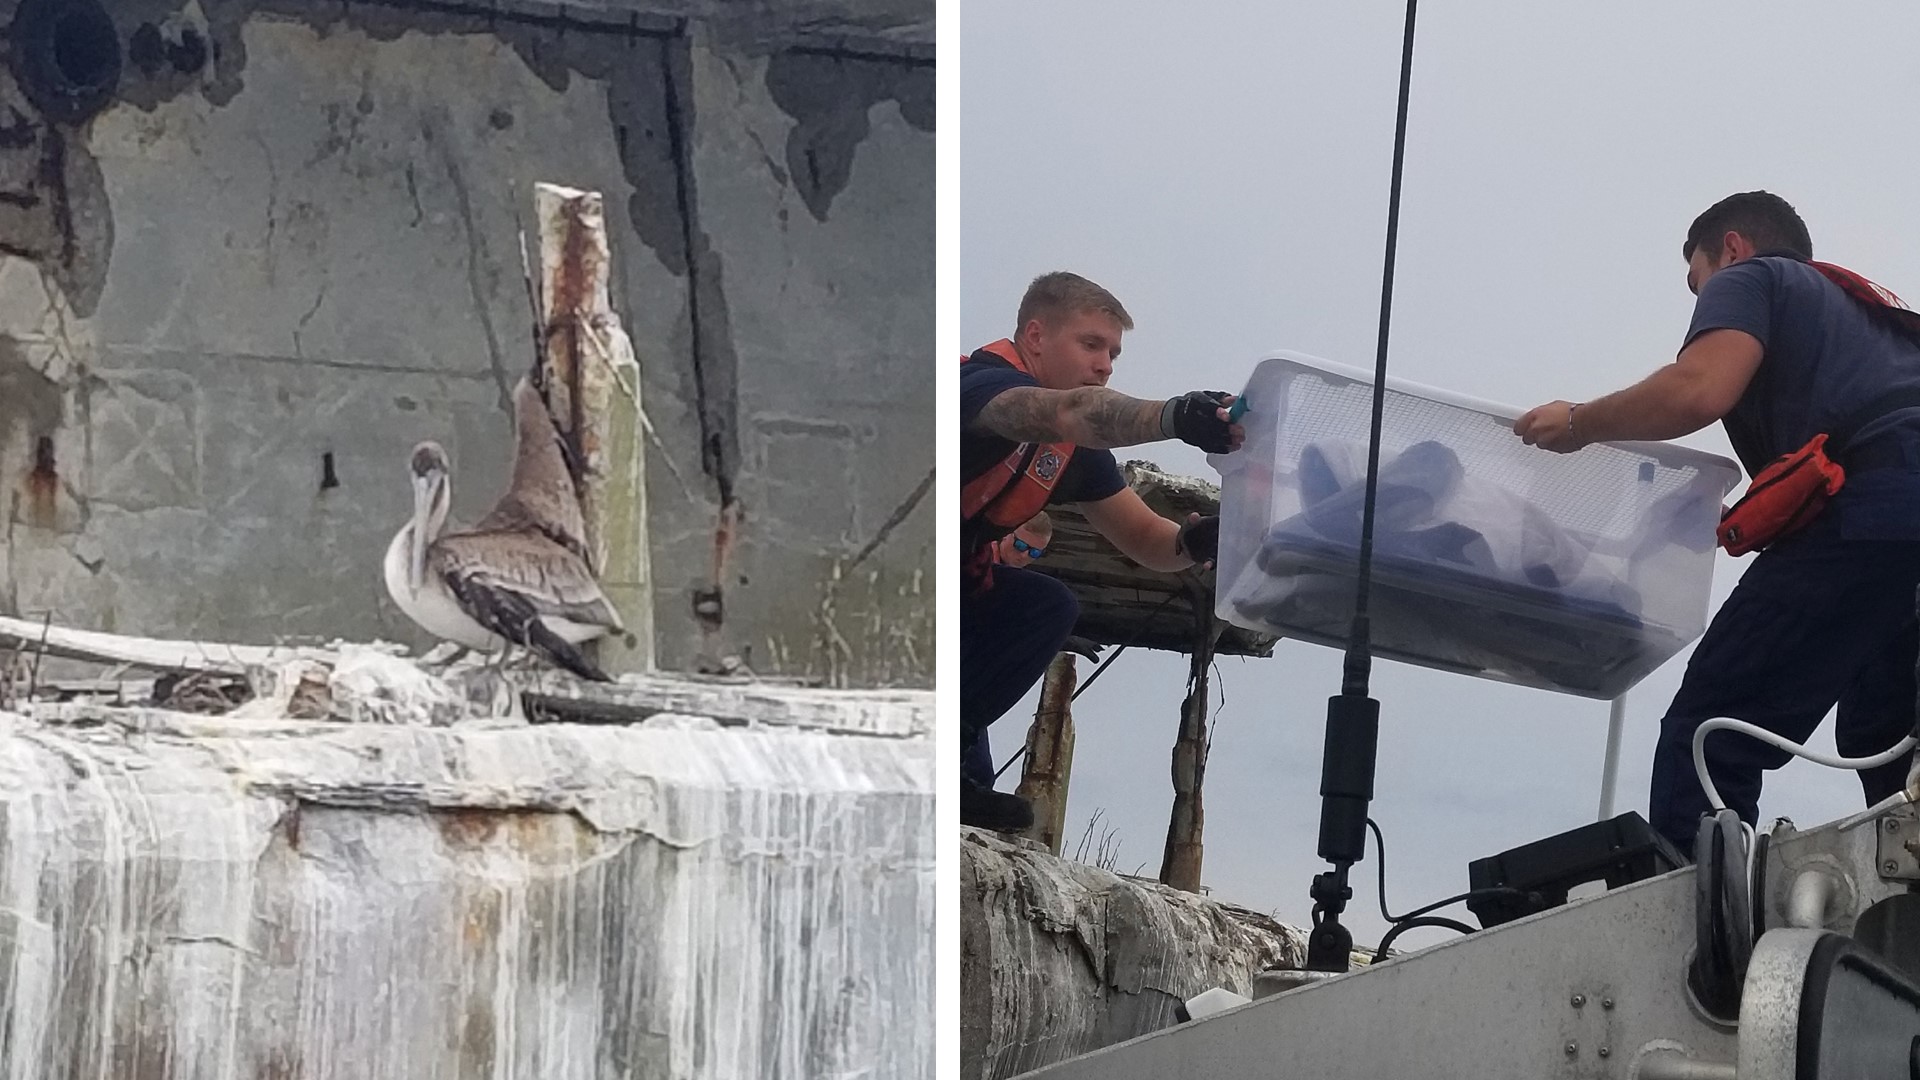 The pelican in distress was rescued by Coast Guard personnel and a wildlife rehabilitation specialist. the pelican is recovering after a brief surgical procedure.